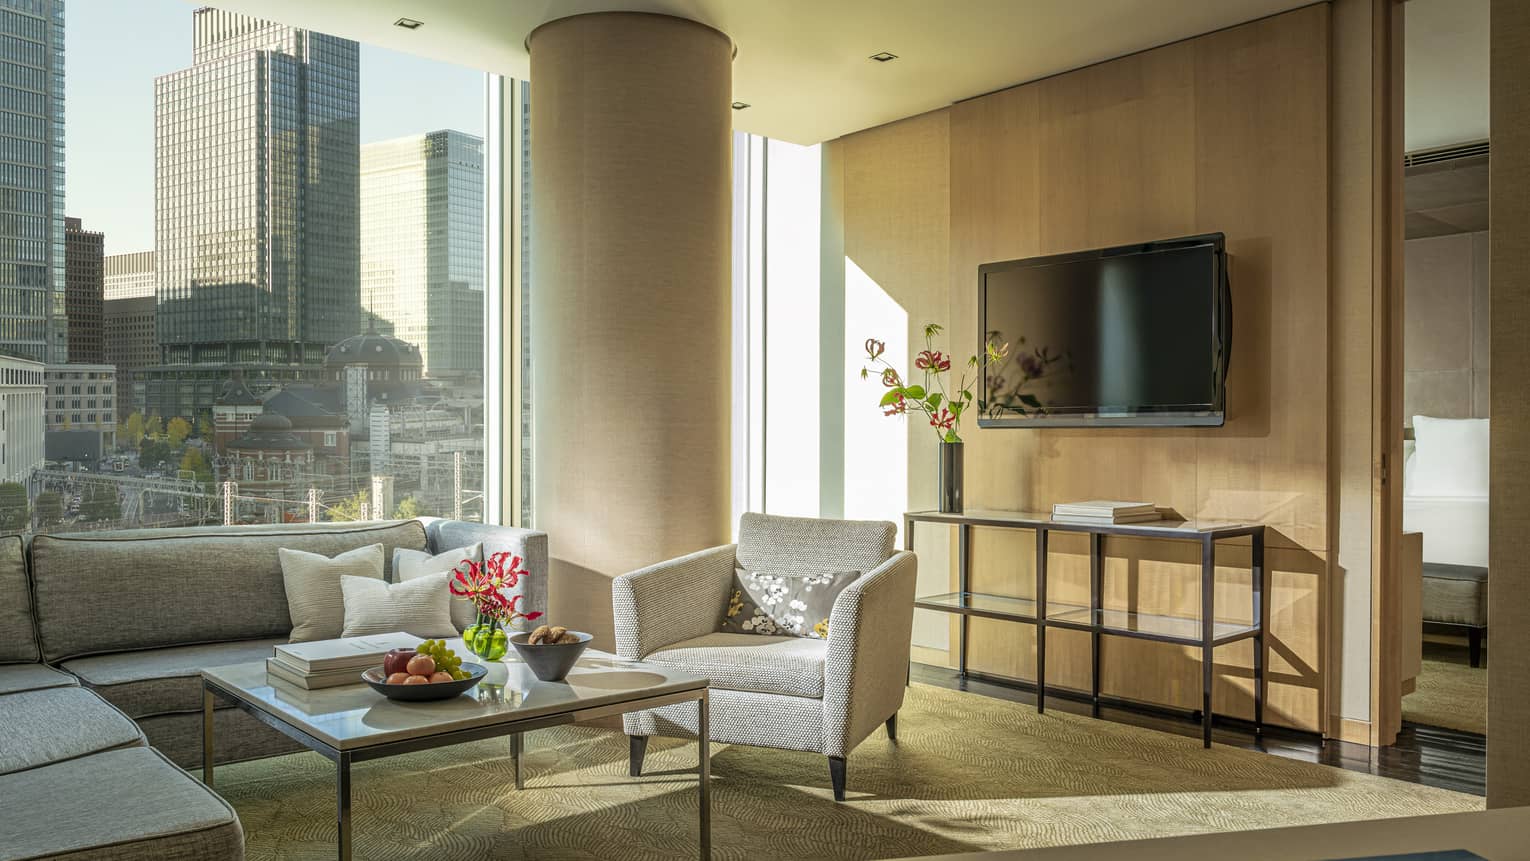 Four Seasons Executive Suite living area with floor-to-ceiling windows with downtown city views